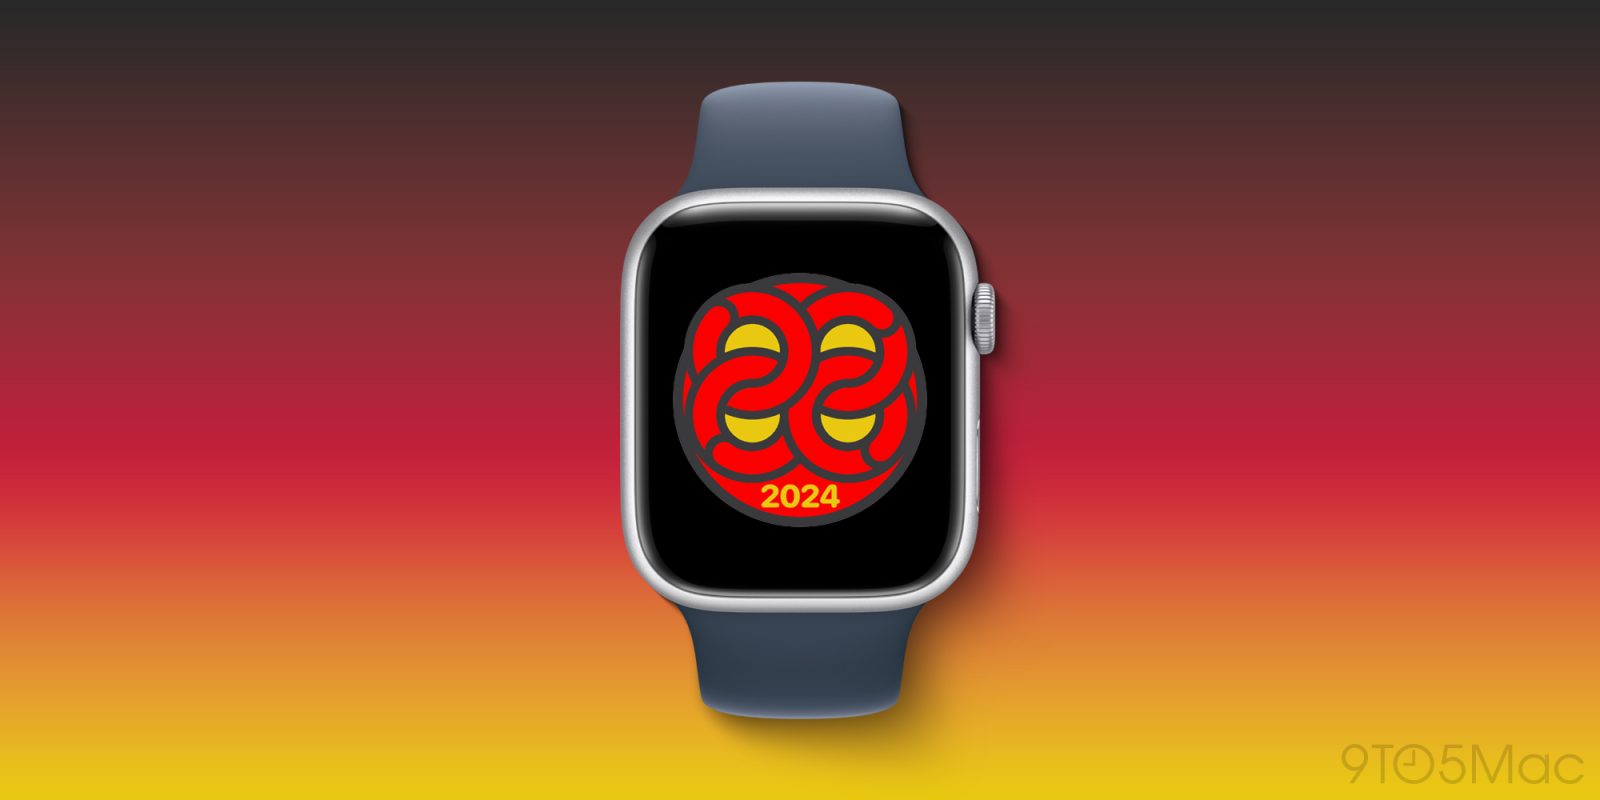 ‘National Fitness Day’ is the next Apple Watch Activity Challenge for users in China